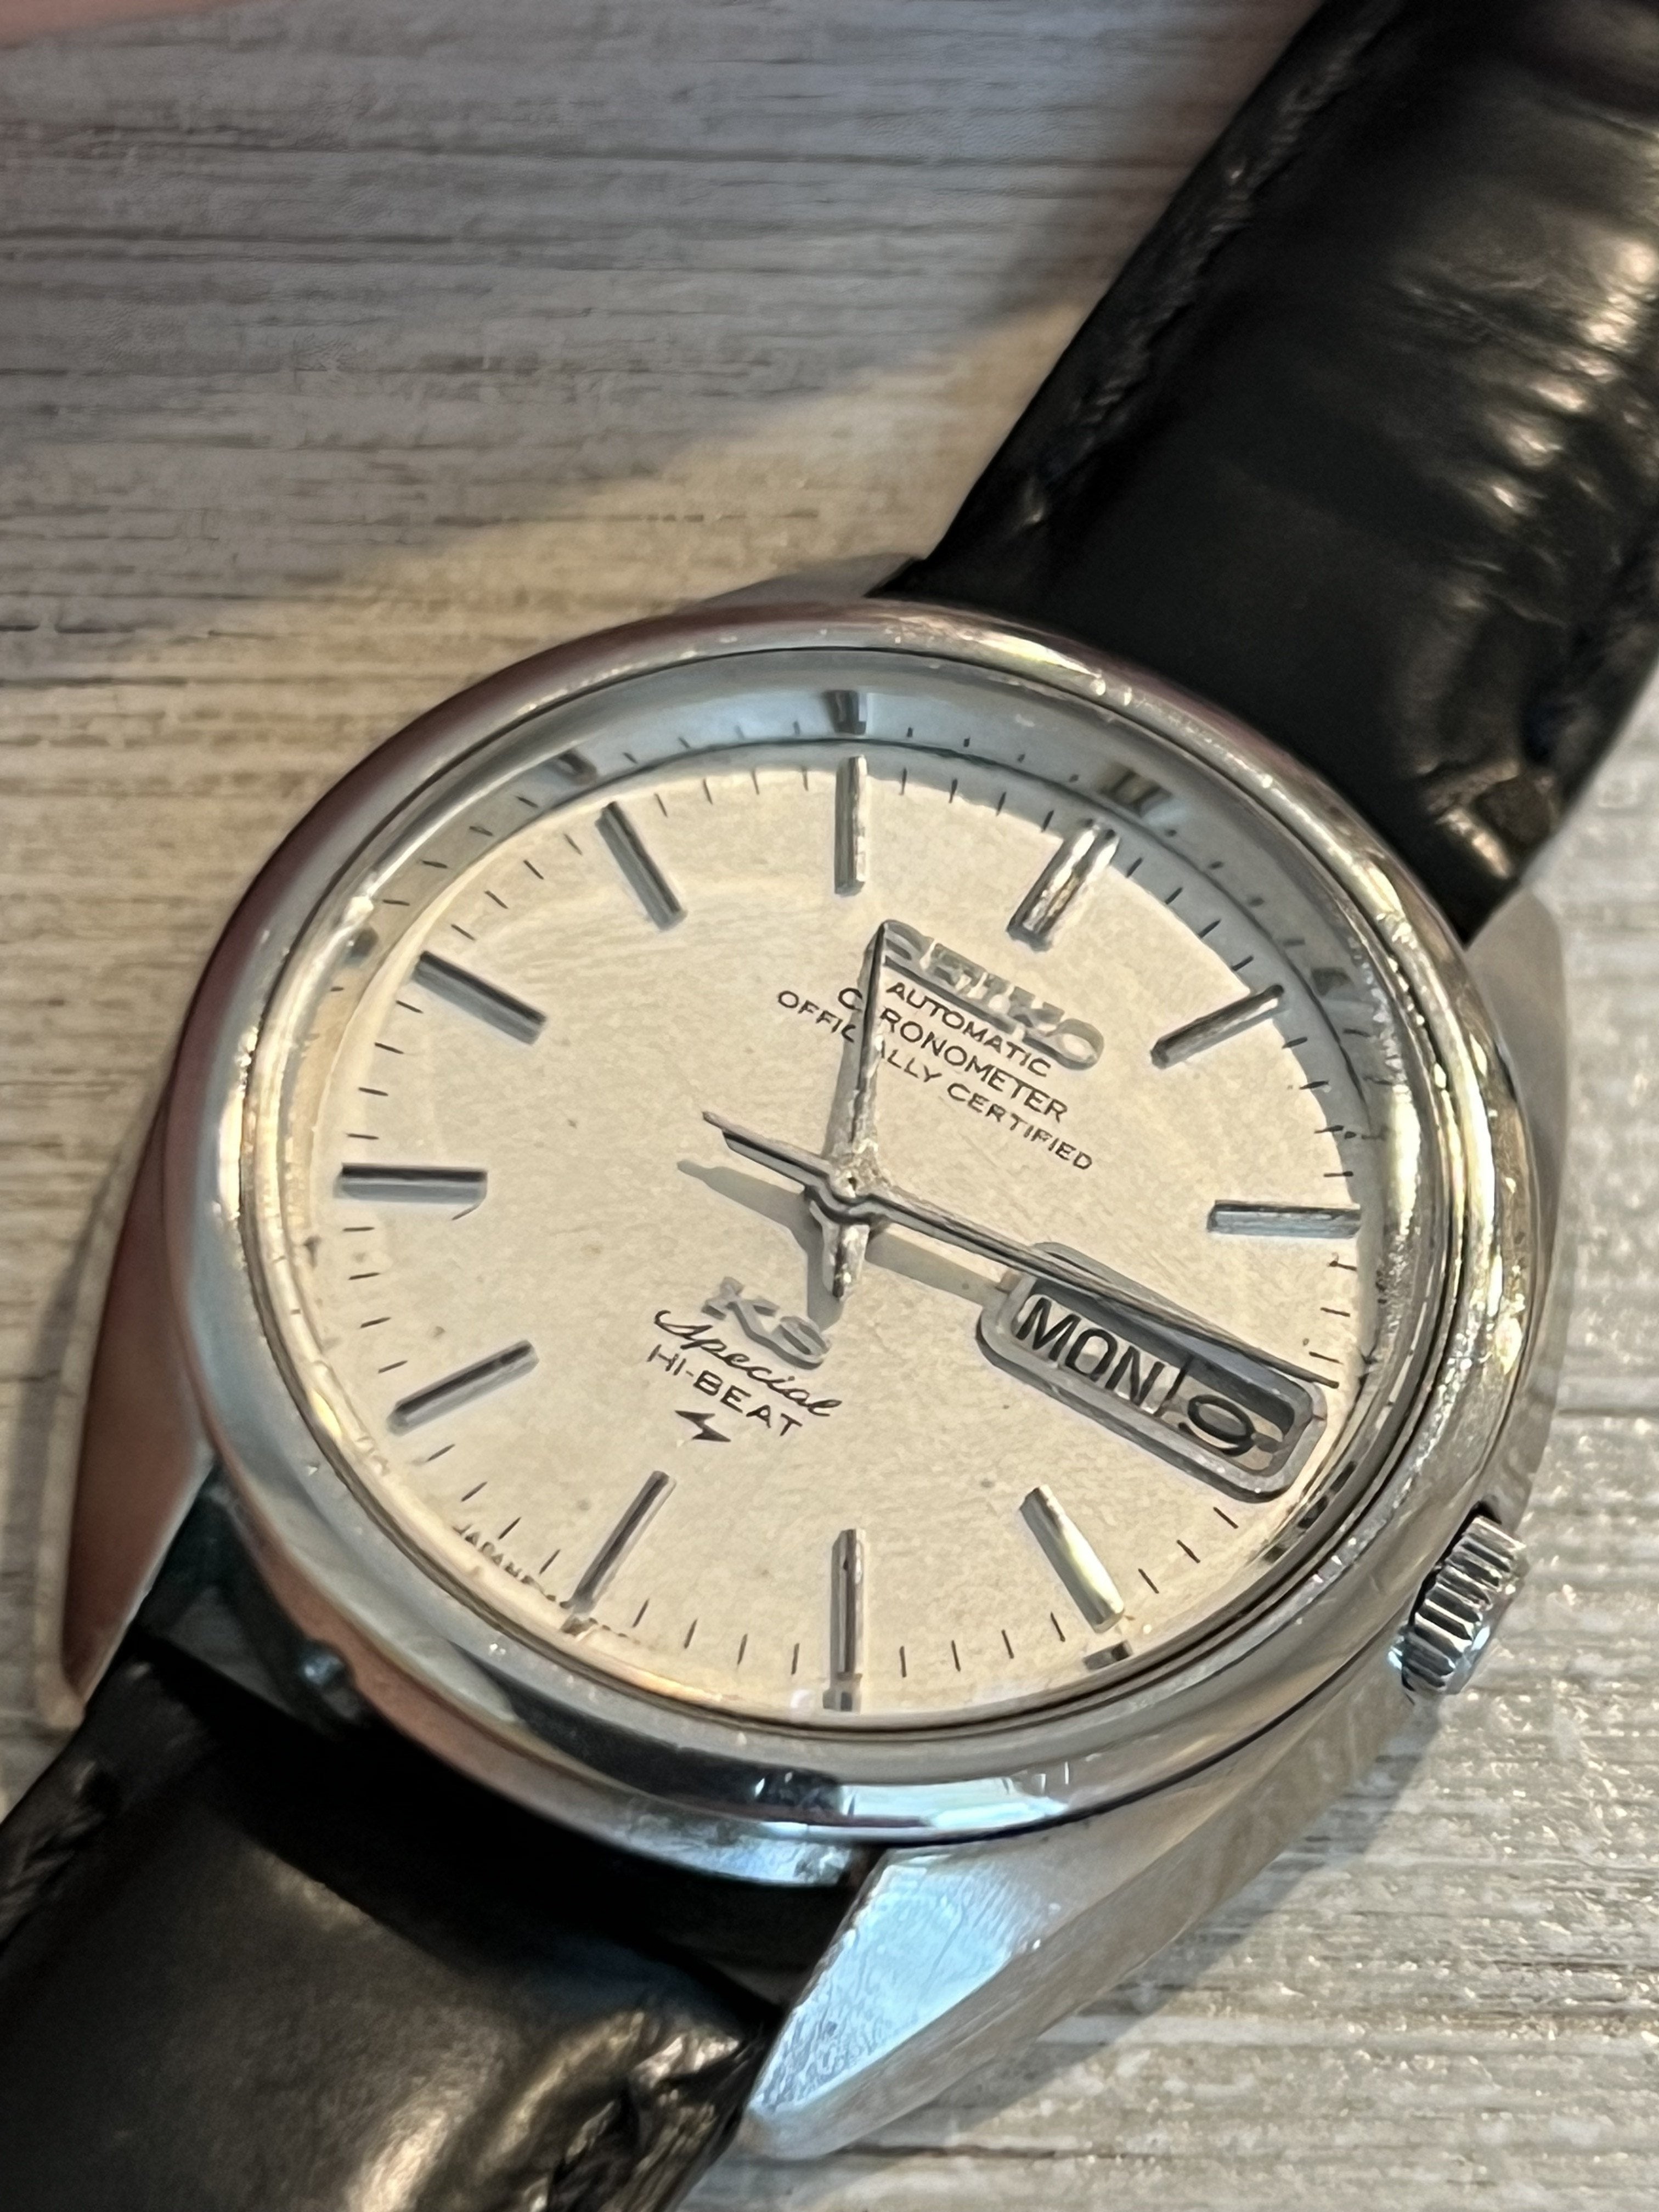 New-to-me King Seiko 5246-6000 | The Watch Site